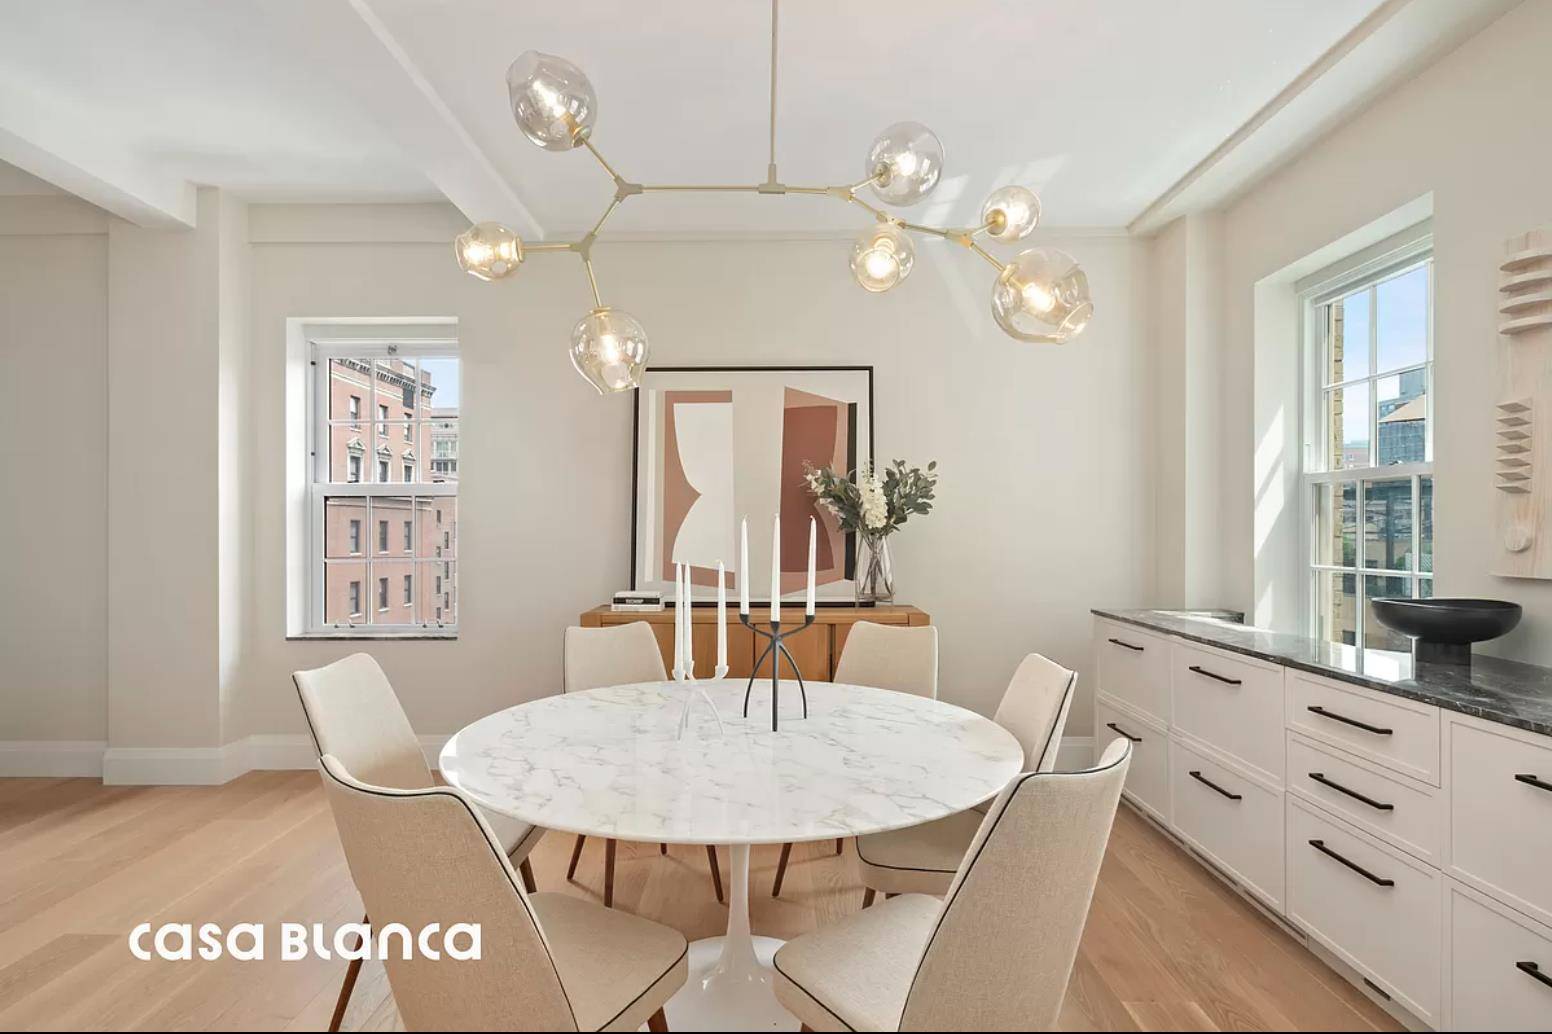 Back on the market ! This fully renovated duplex is housed within the gorgeous, historic architecture of 829 Park Avenue.